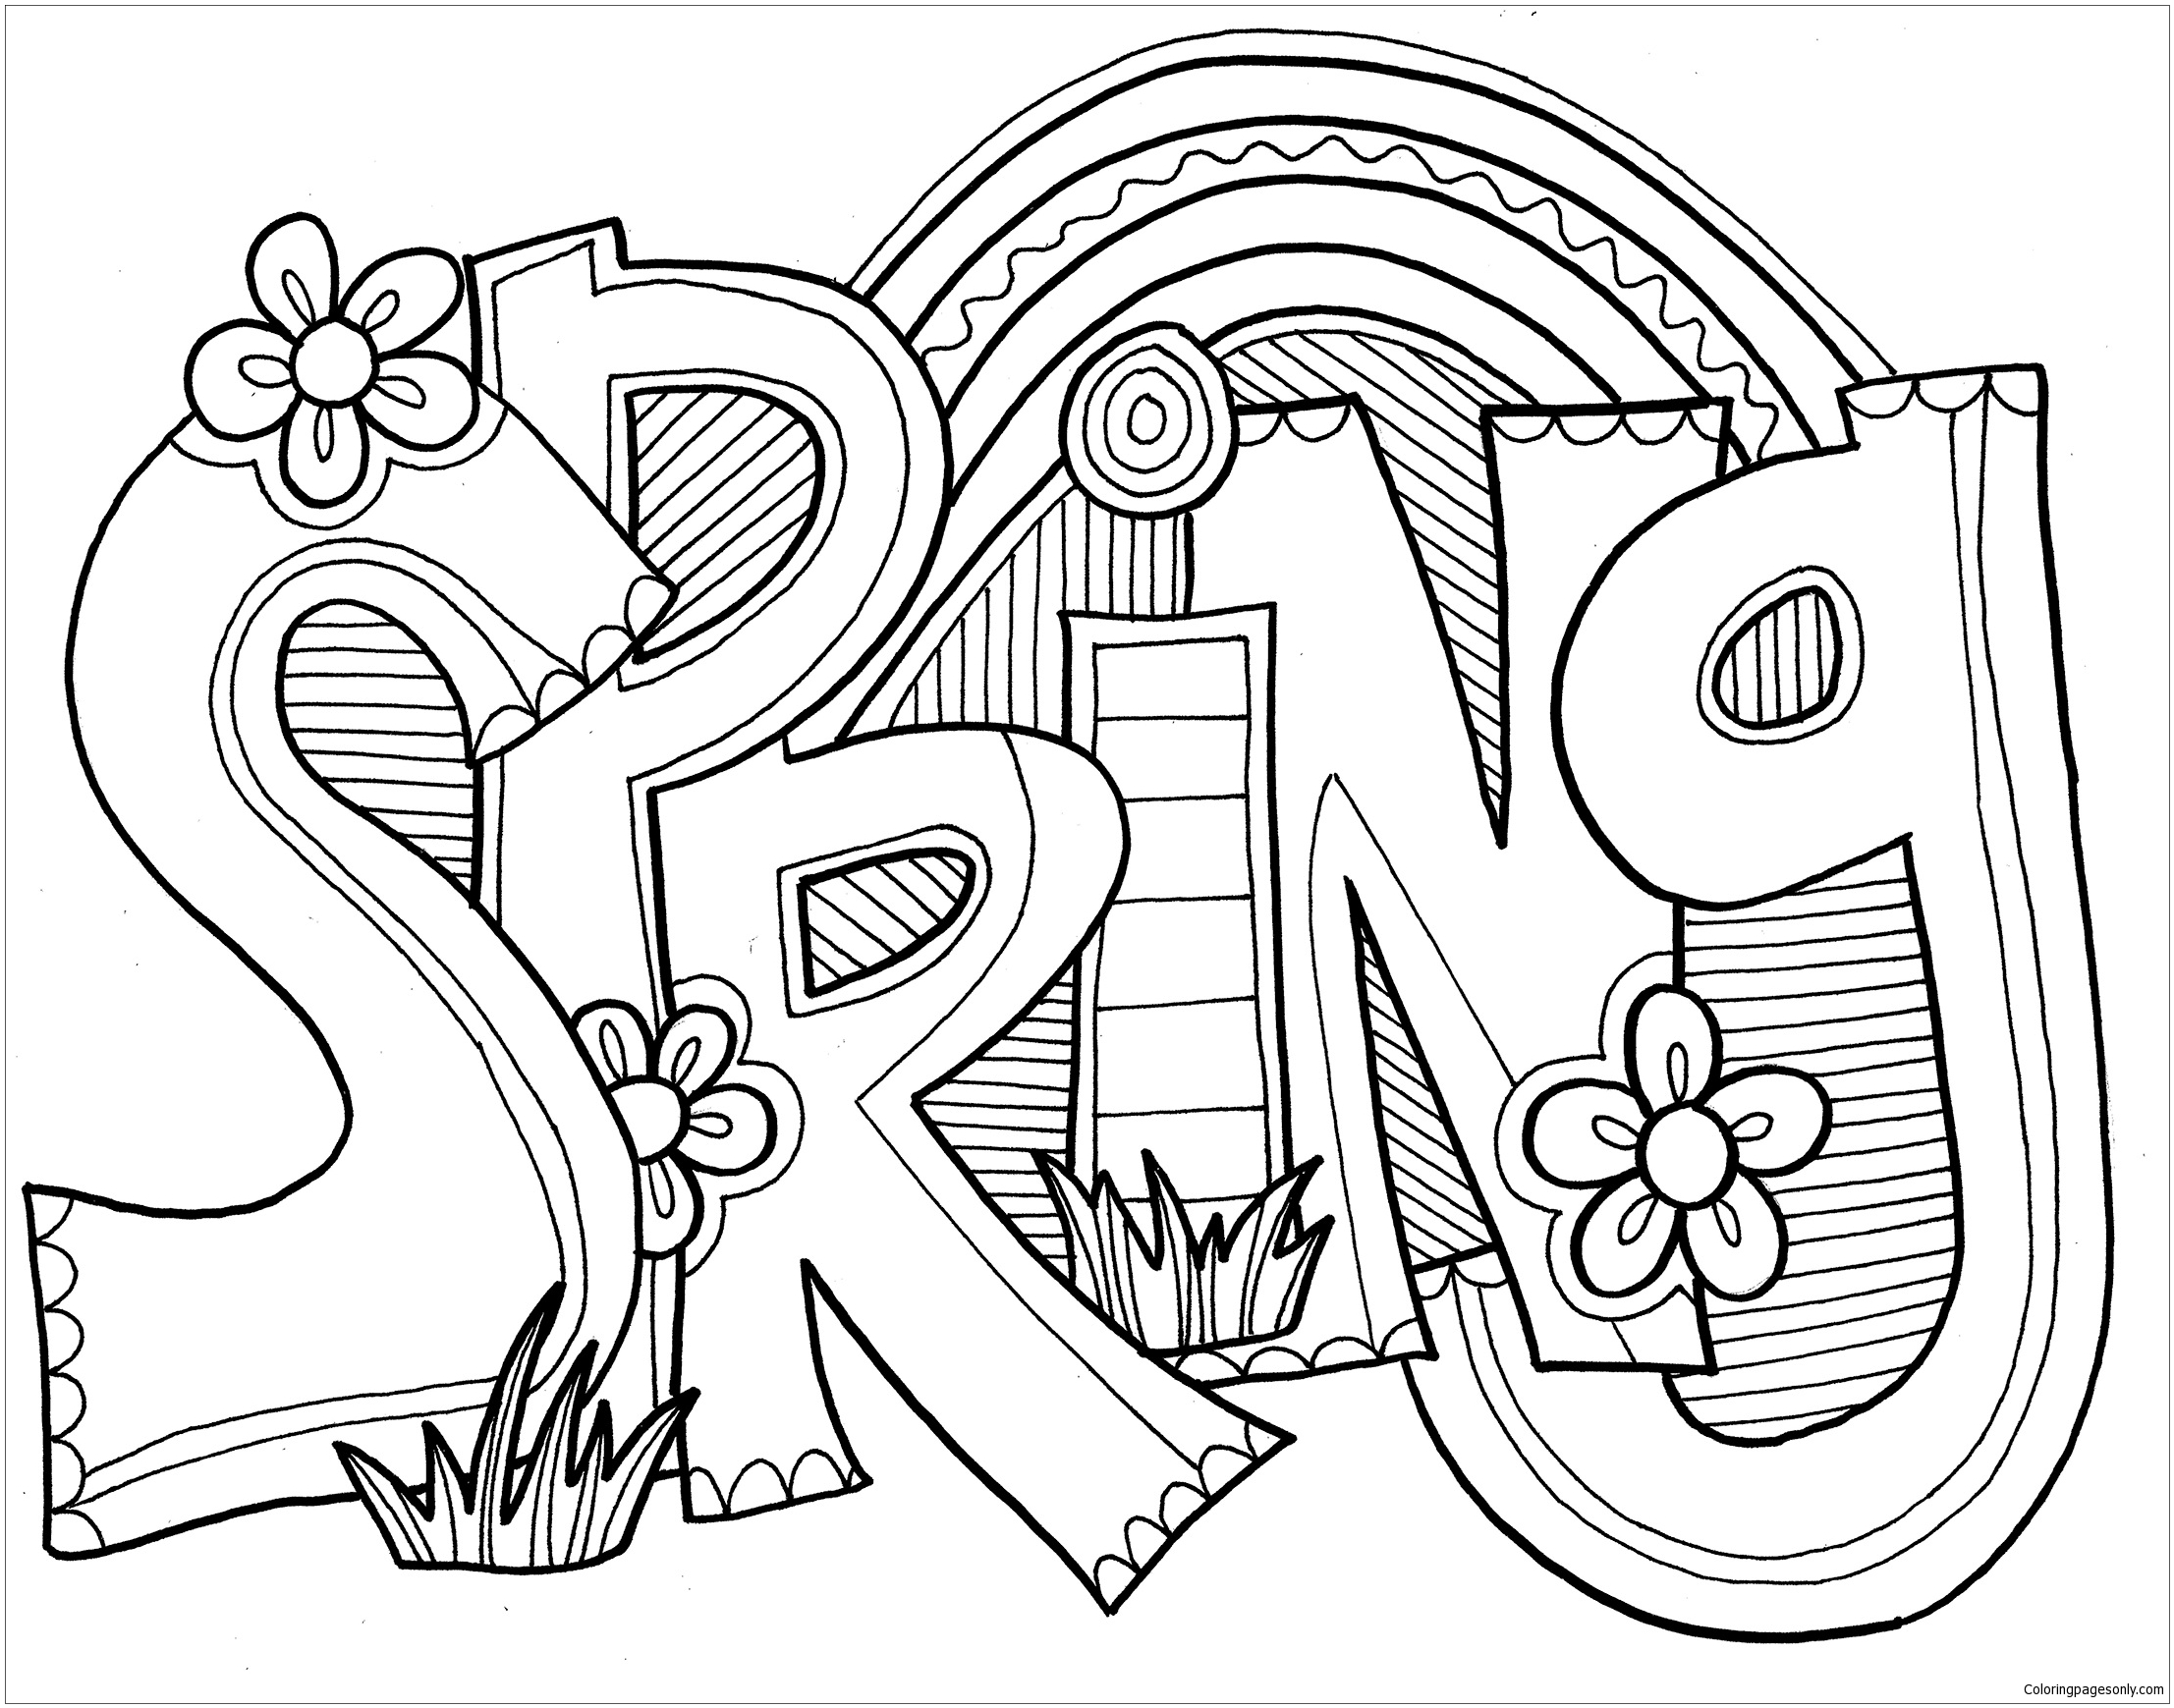 Spring Word Coloring Page - Free Coloring Pages Online